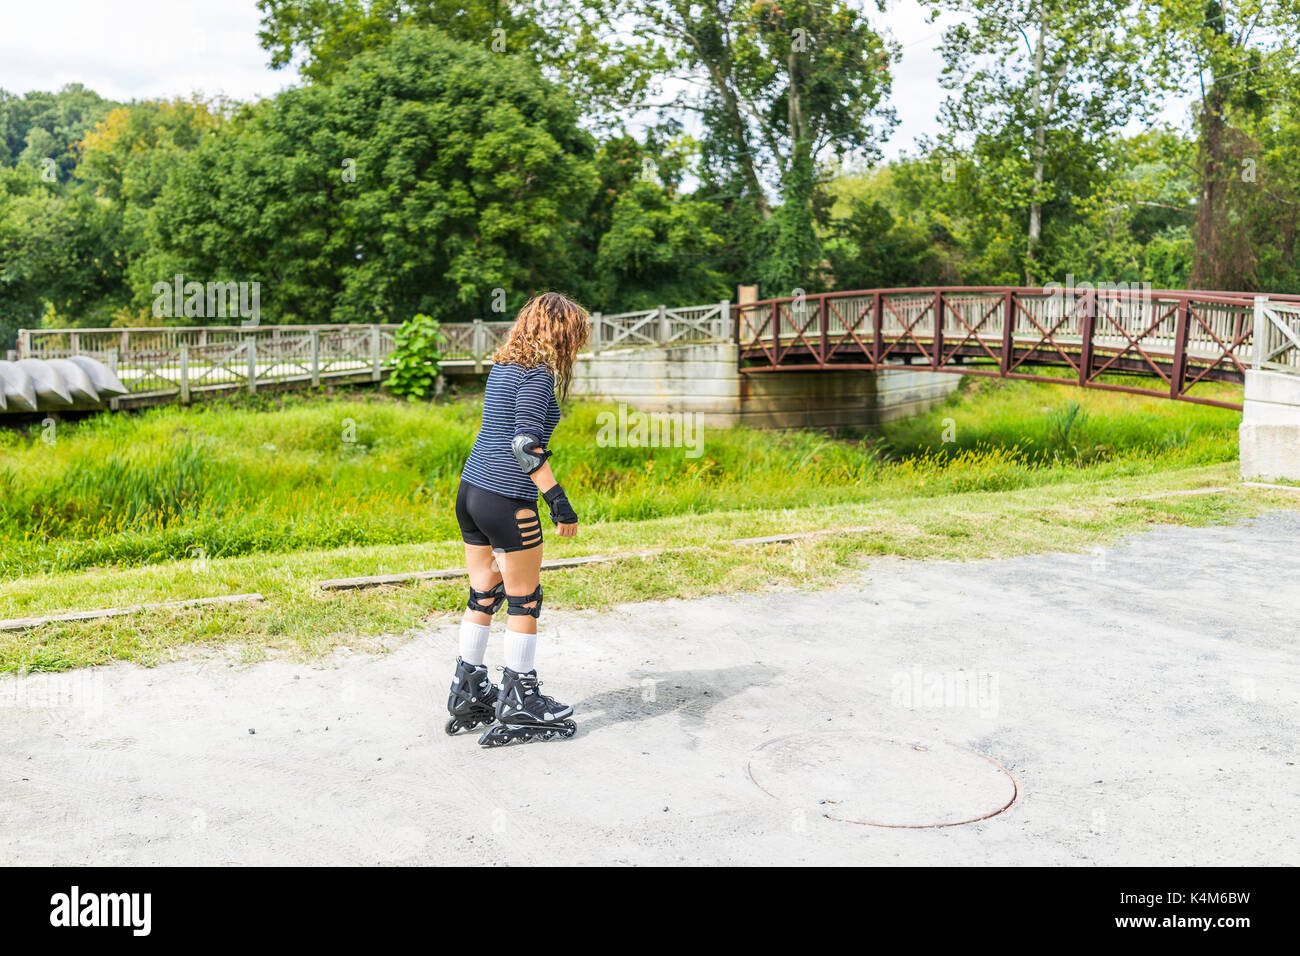 Young woman learning rollerblading outside outdoor in summer park with knee and elbow pads by bridge Stock Photo